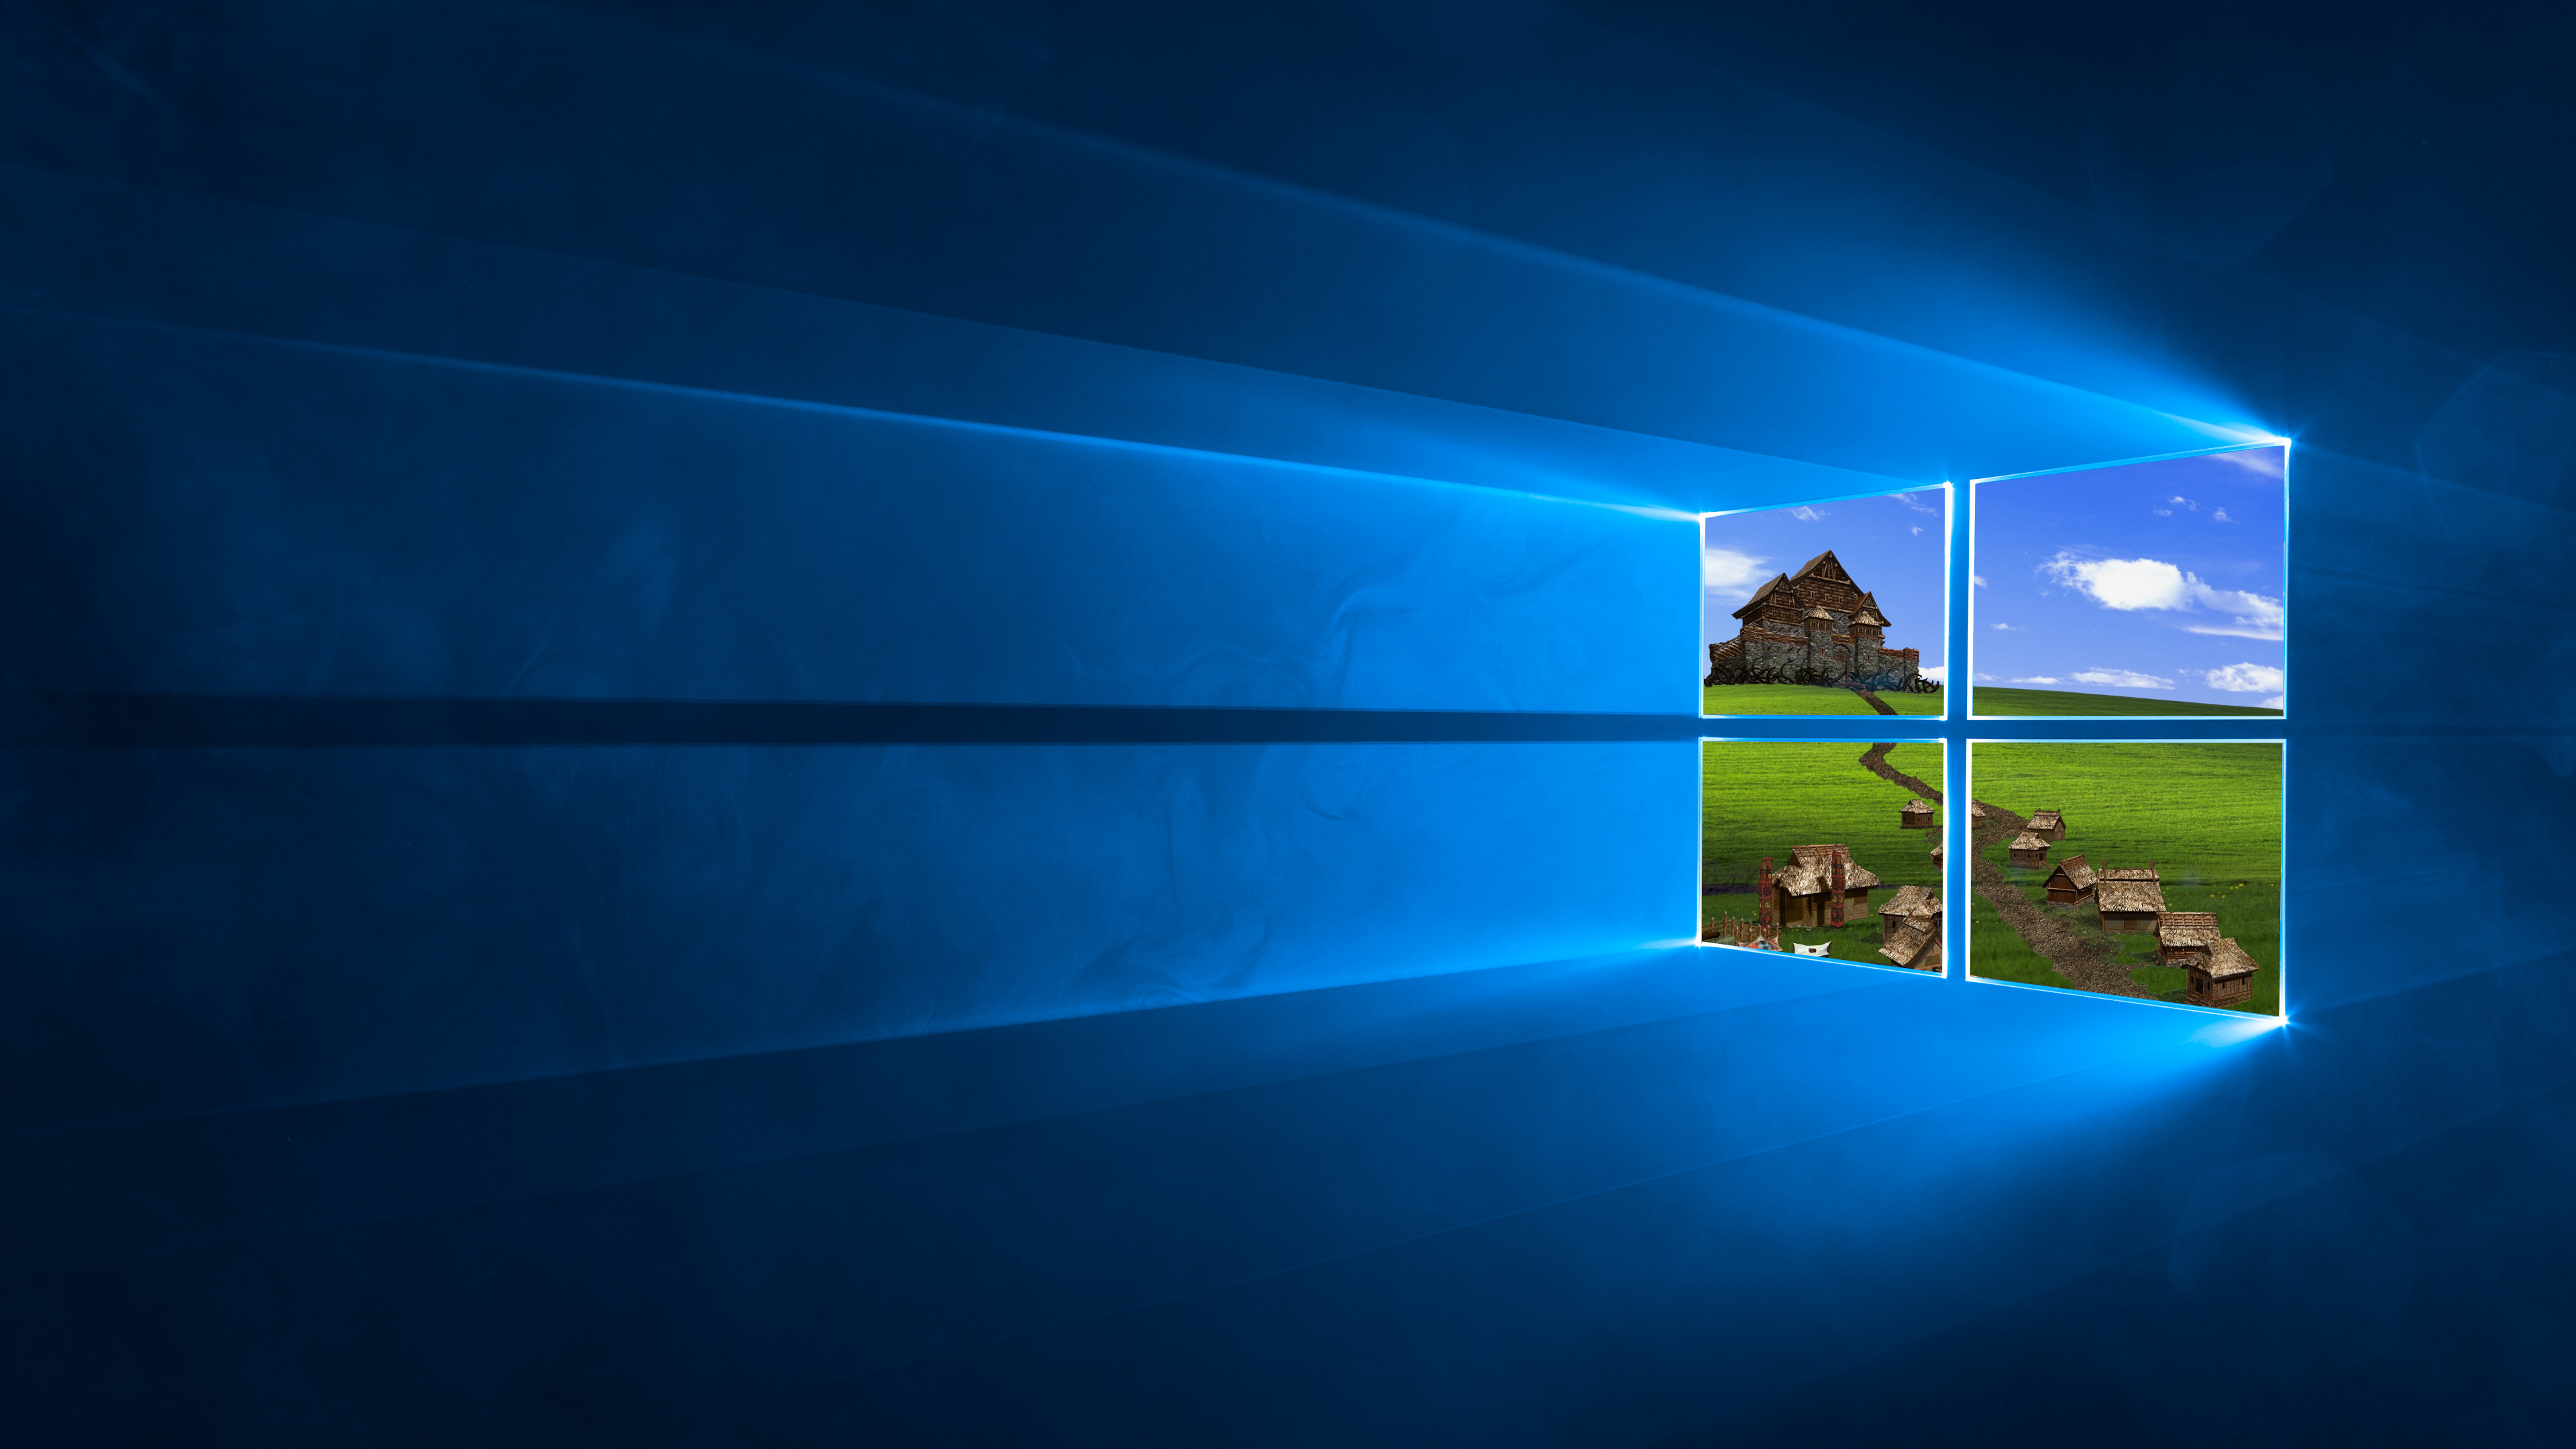 General 3840x2160 Windows 10 landscape Windows XP Heroes of Might and Magic Microsoft operating system digital art